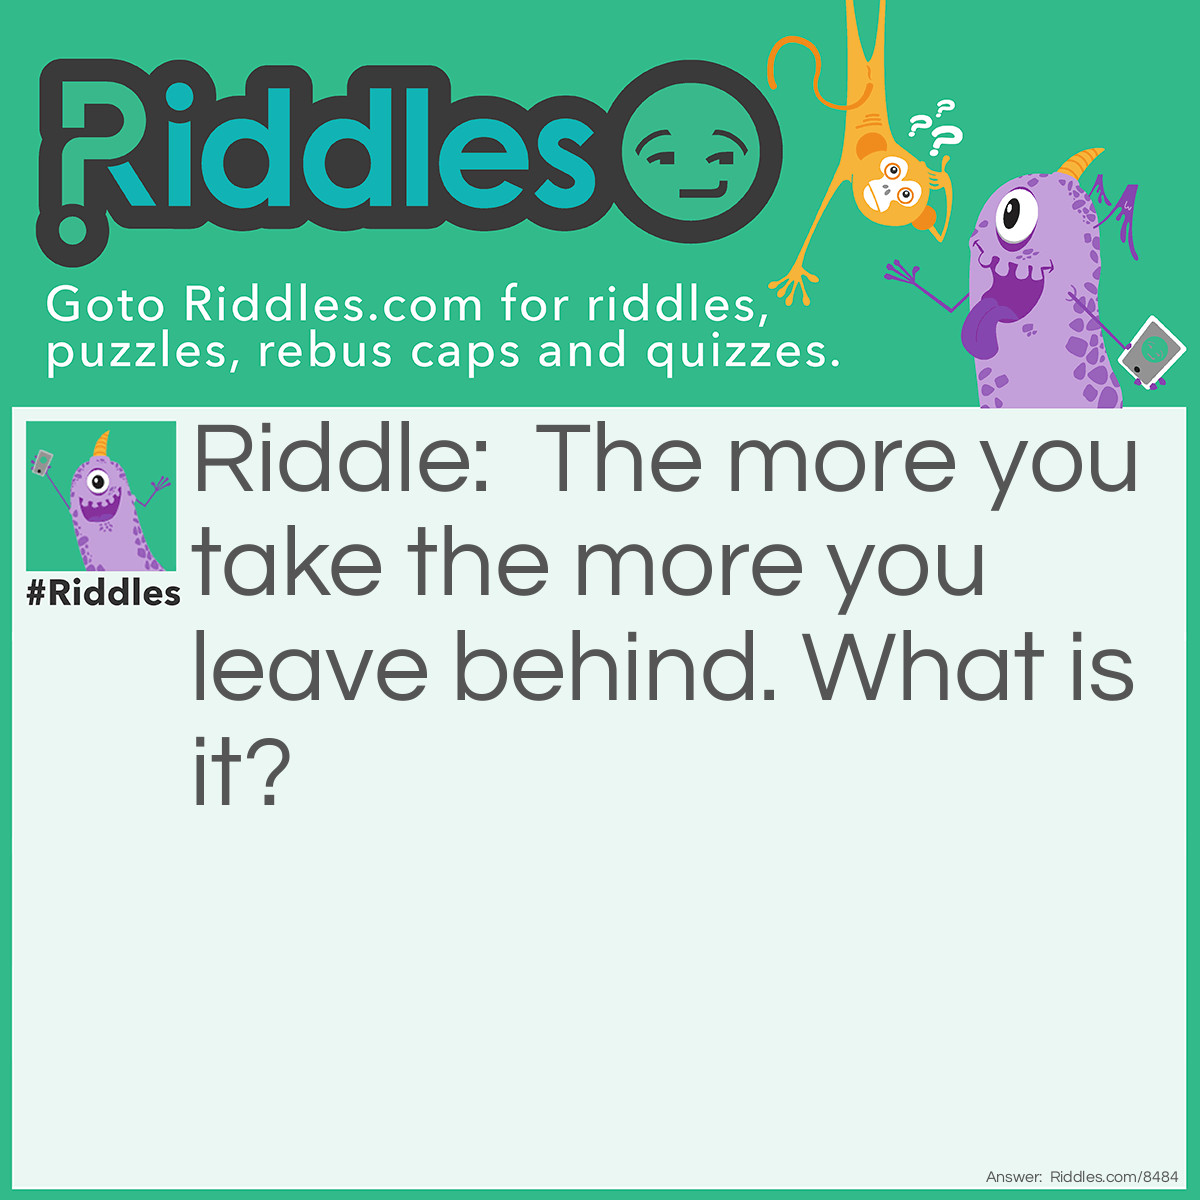 Riddle: The more you take the more you leave behind. What is it? Answer: Finger prints.